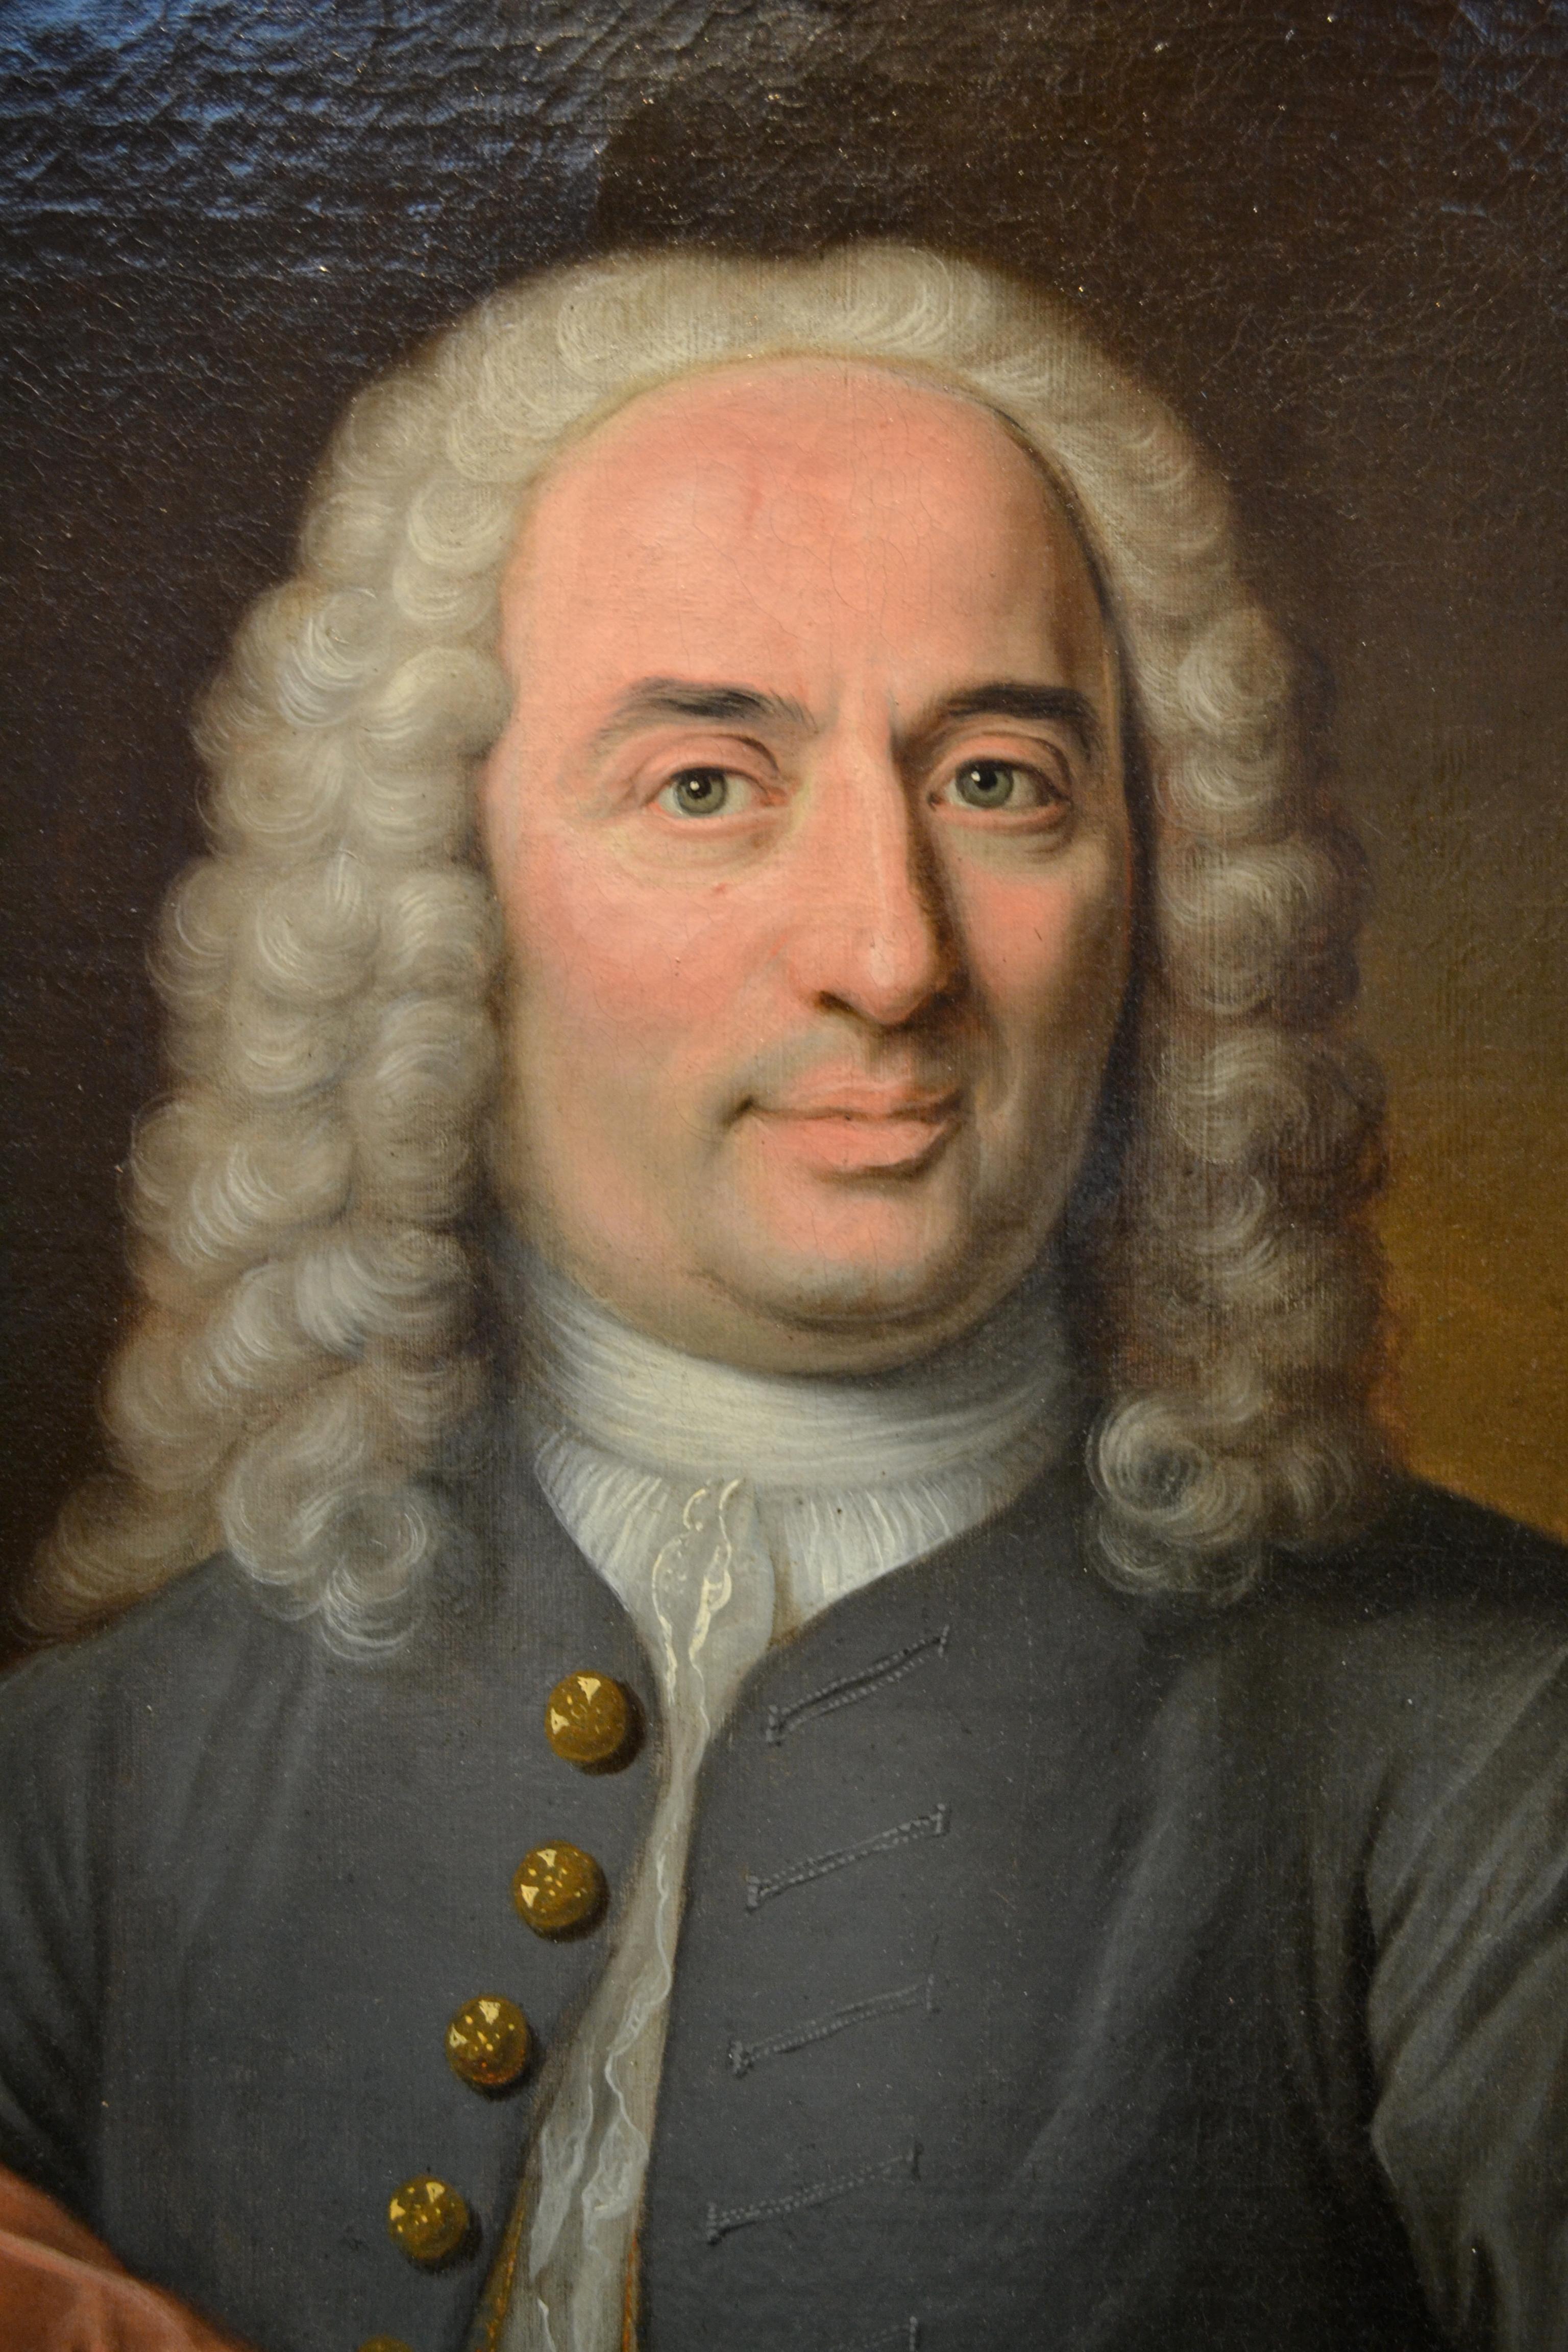 An 18thC portrait of an important Parisian bureaucrat and aristocrat named Antoine Brulley De St-Seine who was born in 1719. He died in Paris and according to a typed biographical label at the back of the canvas he was unmarried and the date of